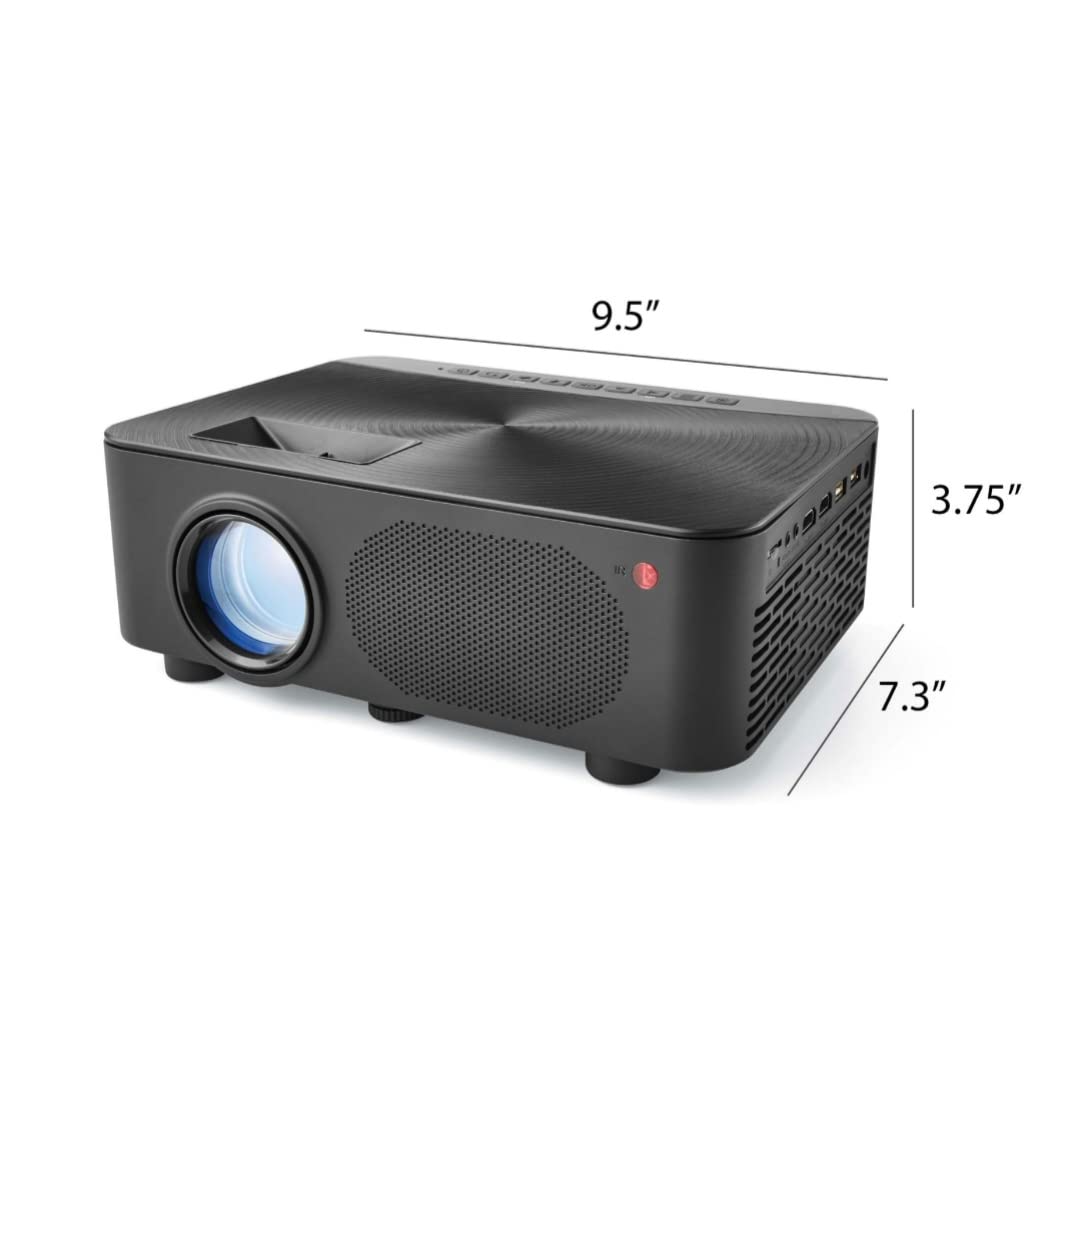 Onn 720p LCD Home Theater Projector Black 1280 x 720 Resolution Aspect ratio: 16:9, 4:3 Project up to 150 inches - 100020900